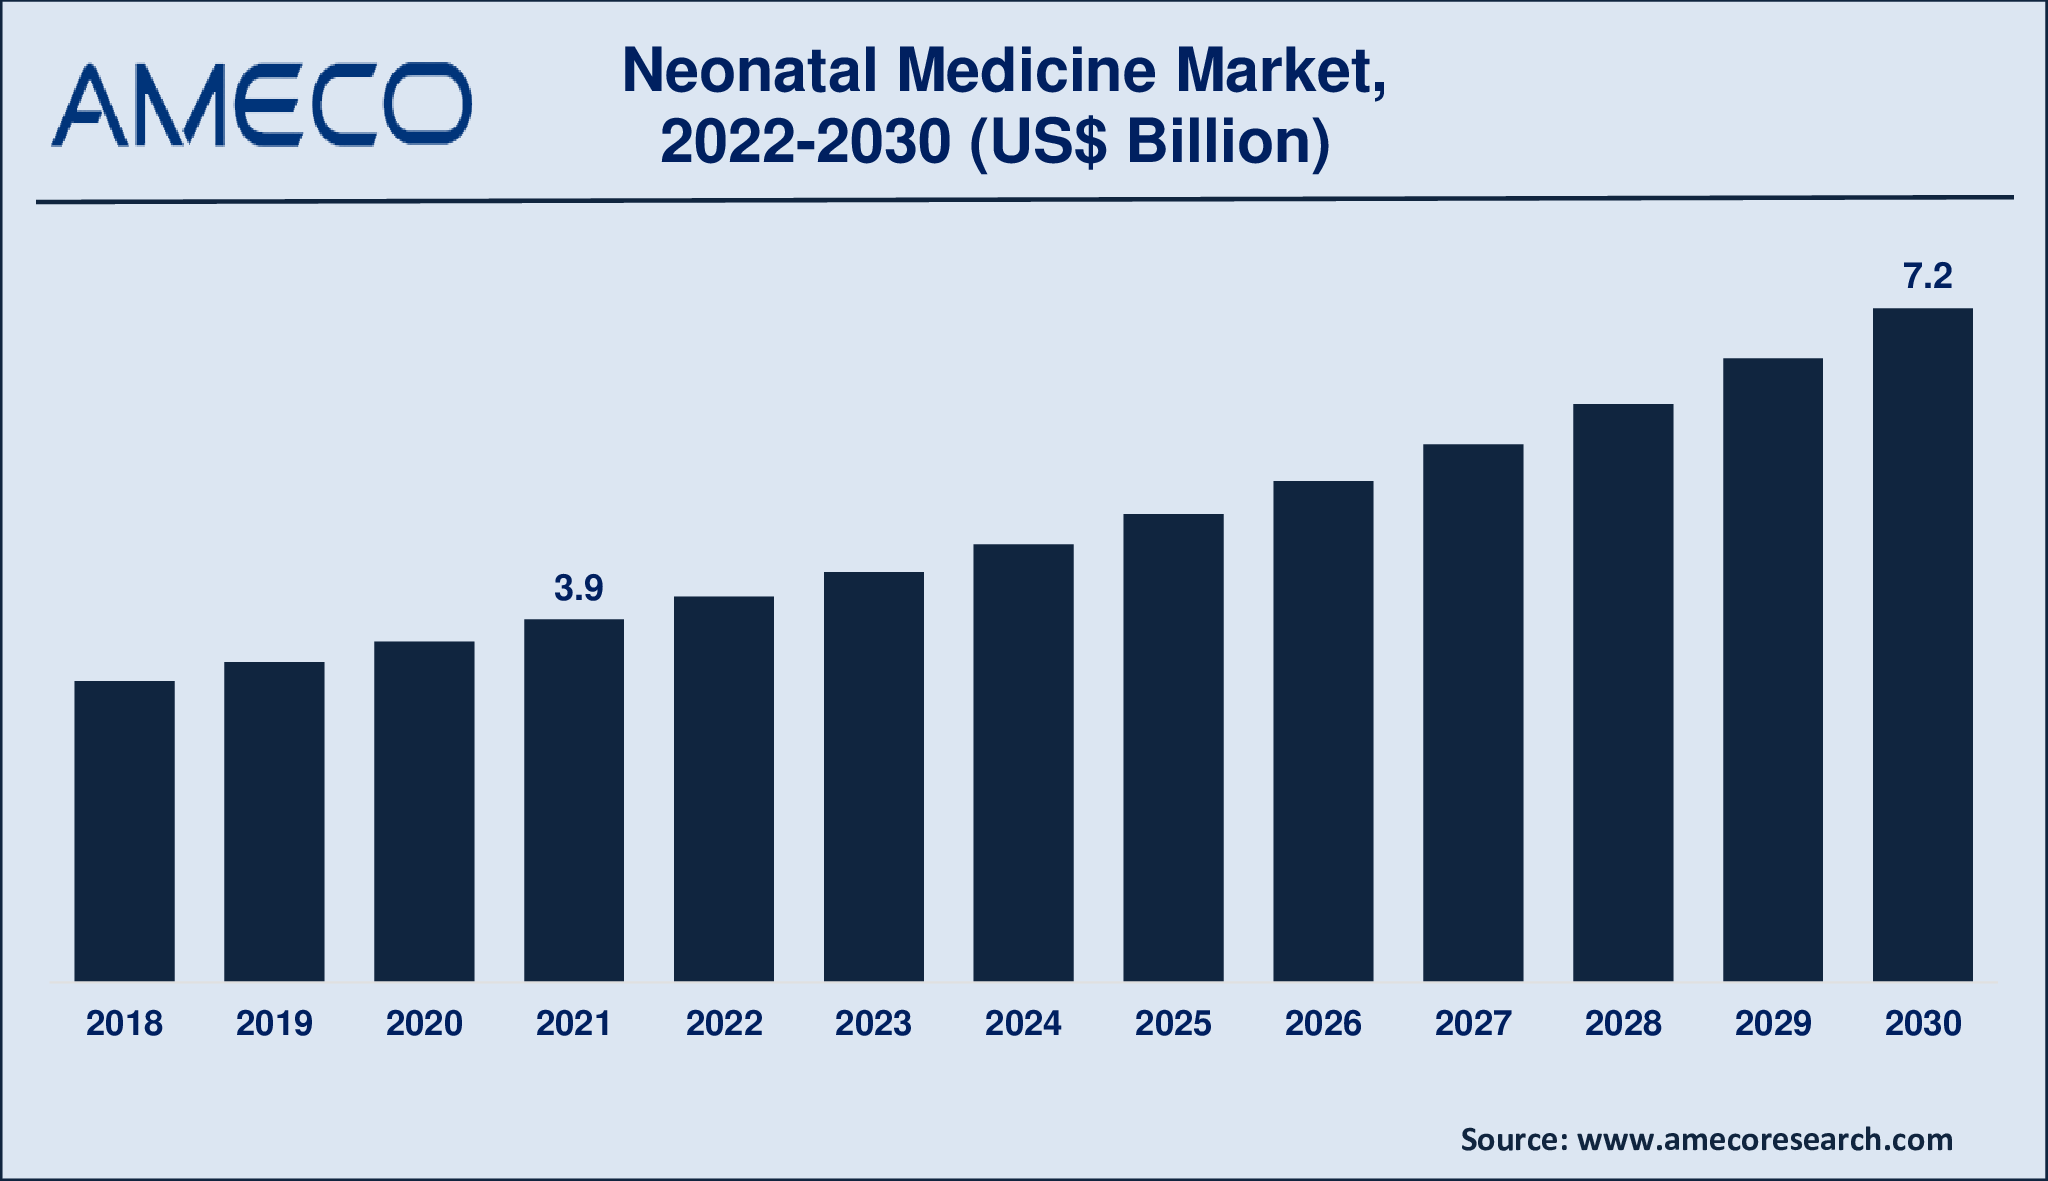 Neonatal Medicine Market Size, Share, Growth, Trends, and Forecast 2022-2030